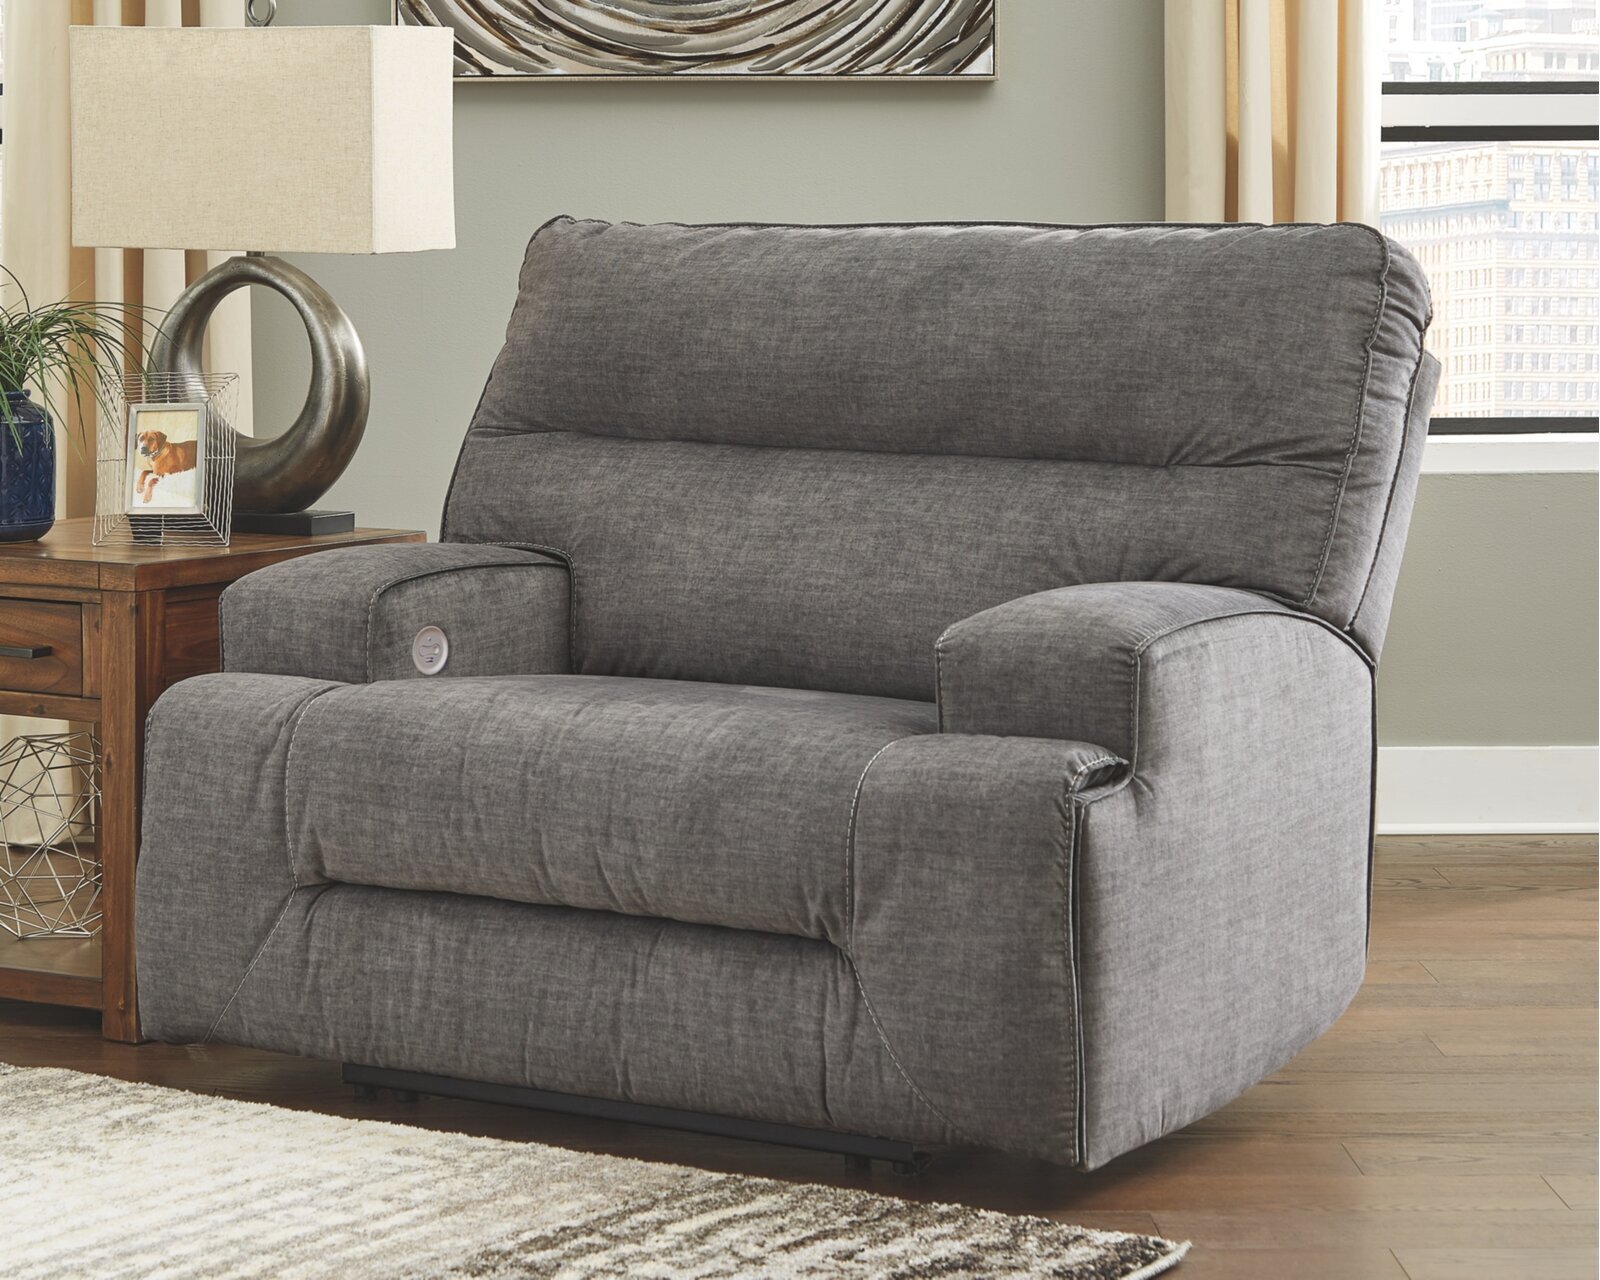 Factors to Consider When Buying the Best Extra Wide Recliners